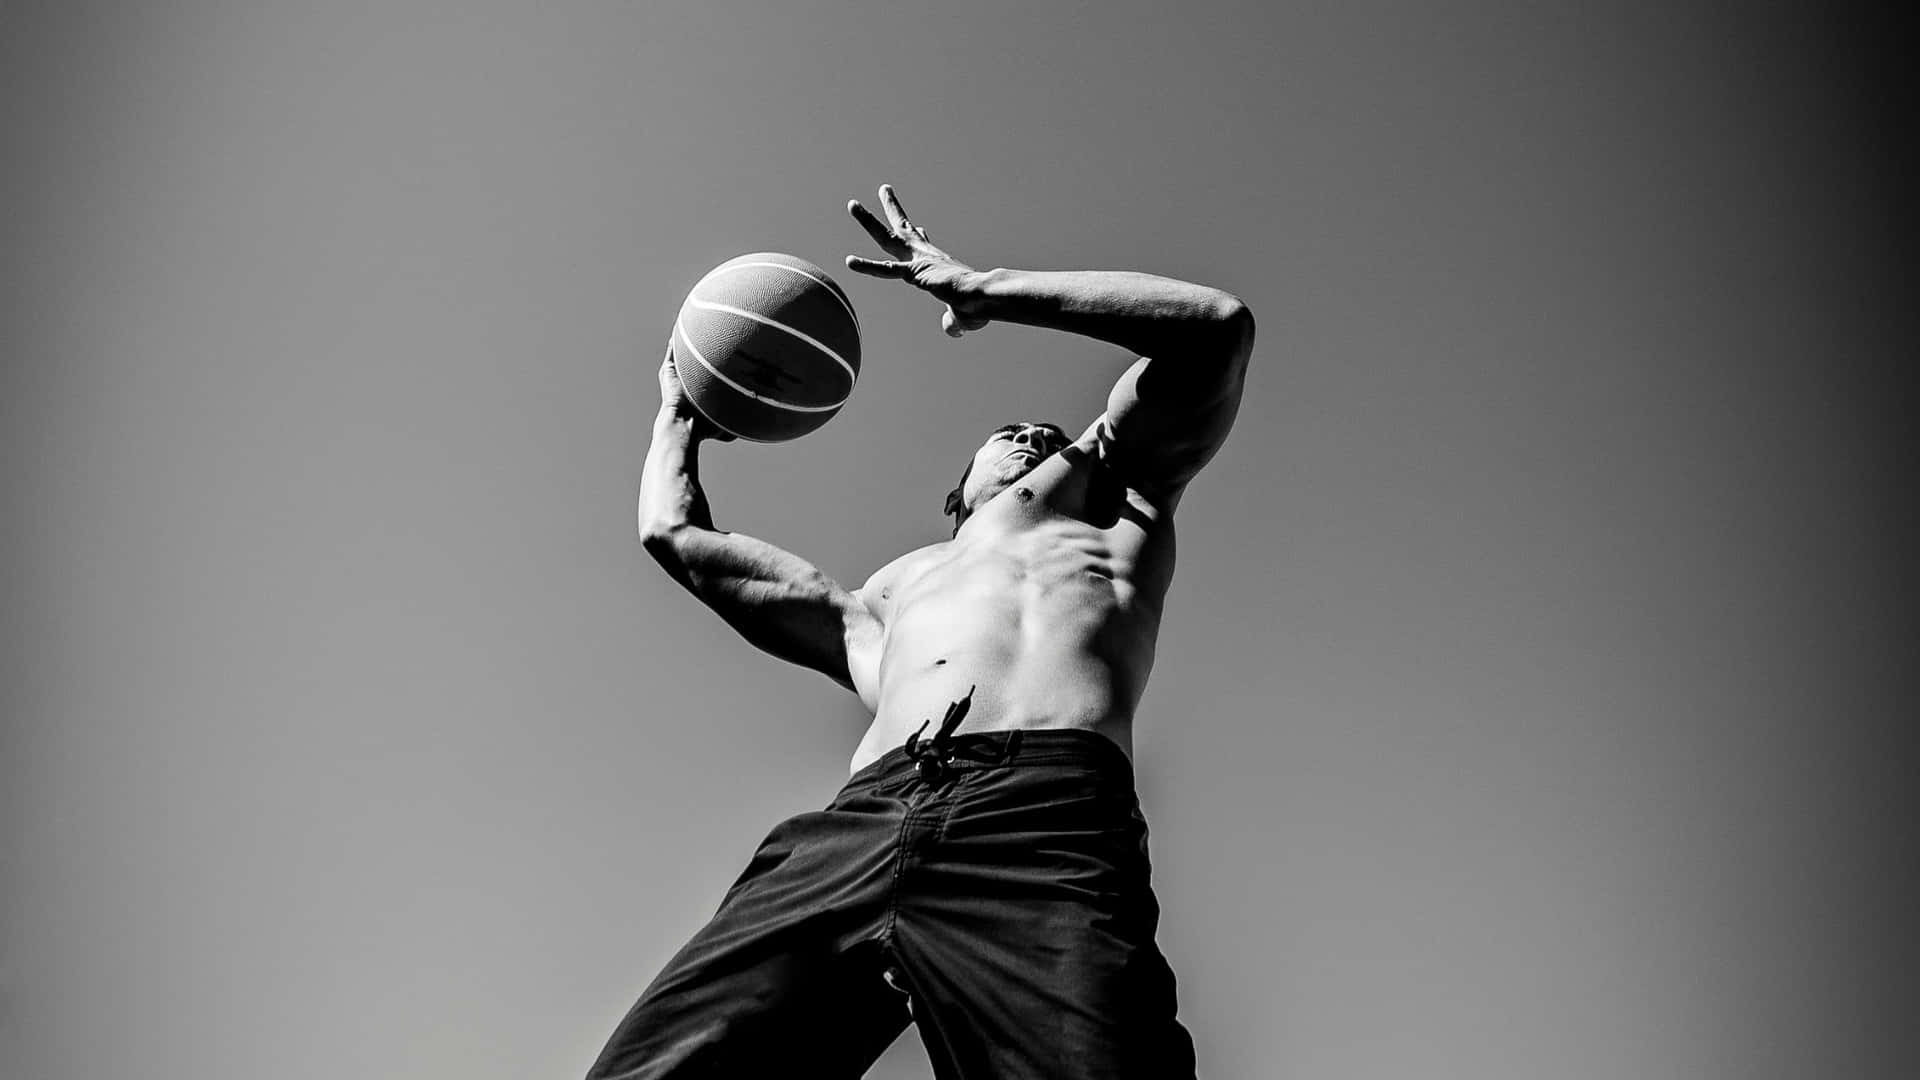 Download 2560x1440 Basketball Grayscale Wallpaper | Wallpapers.com